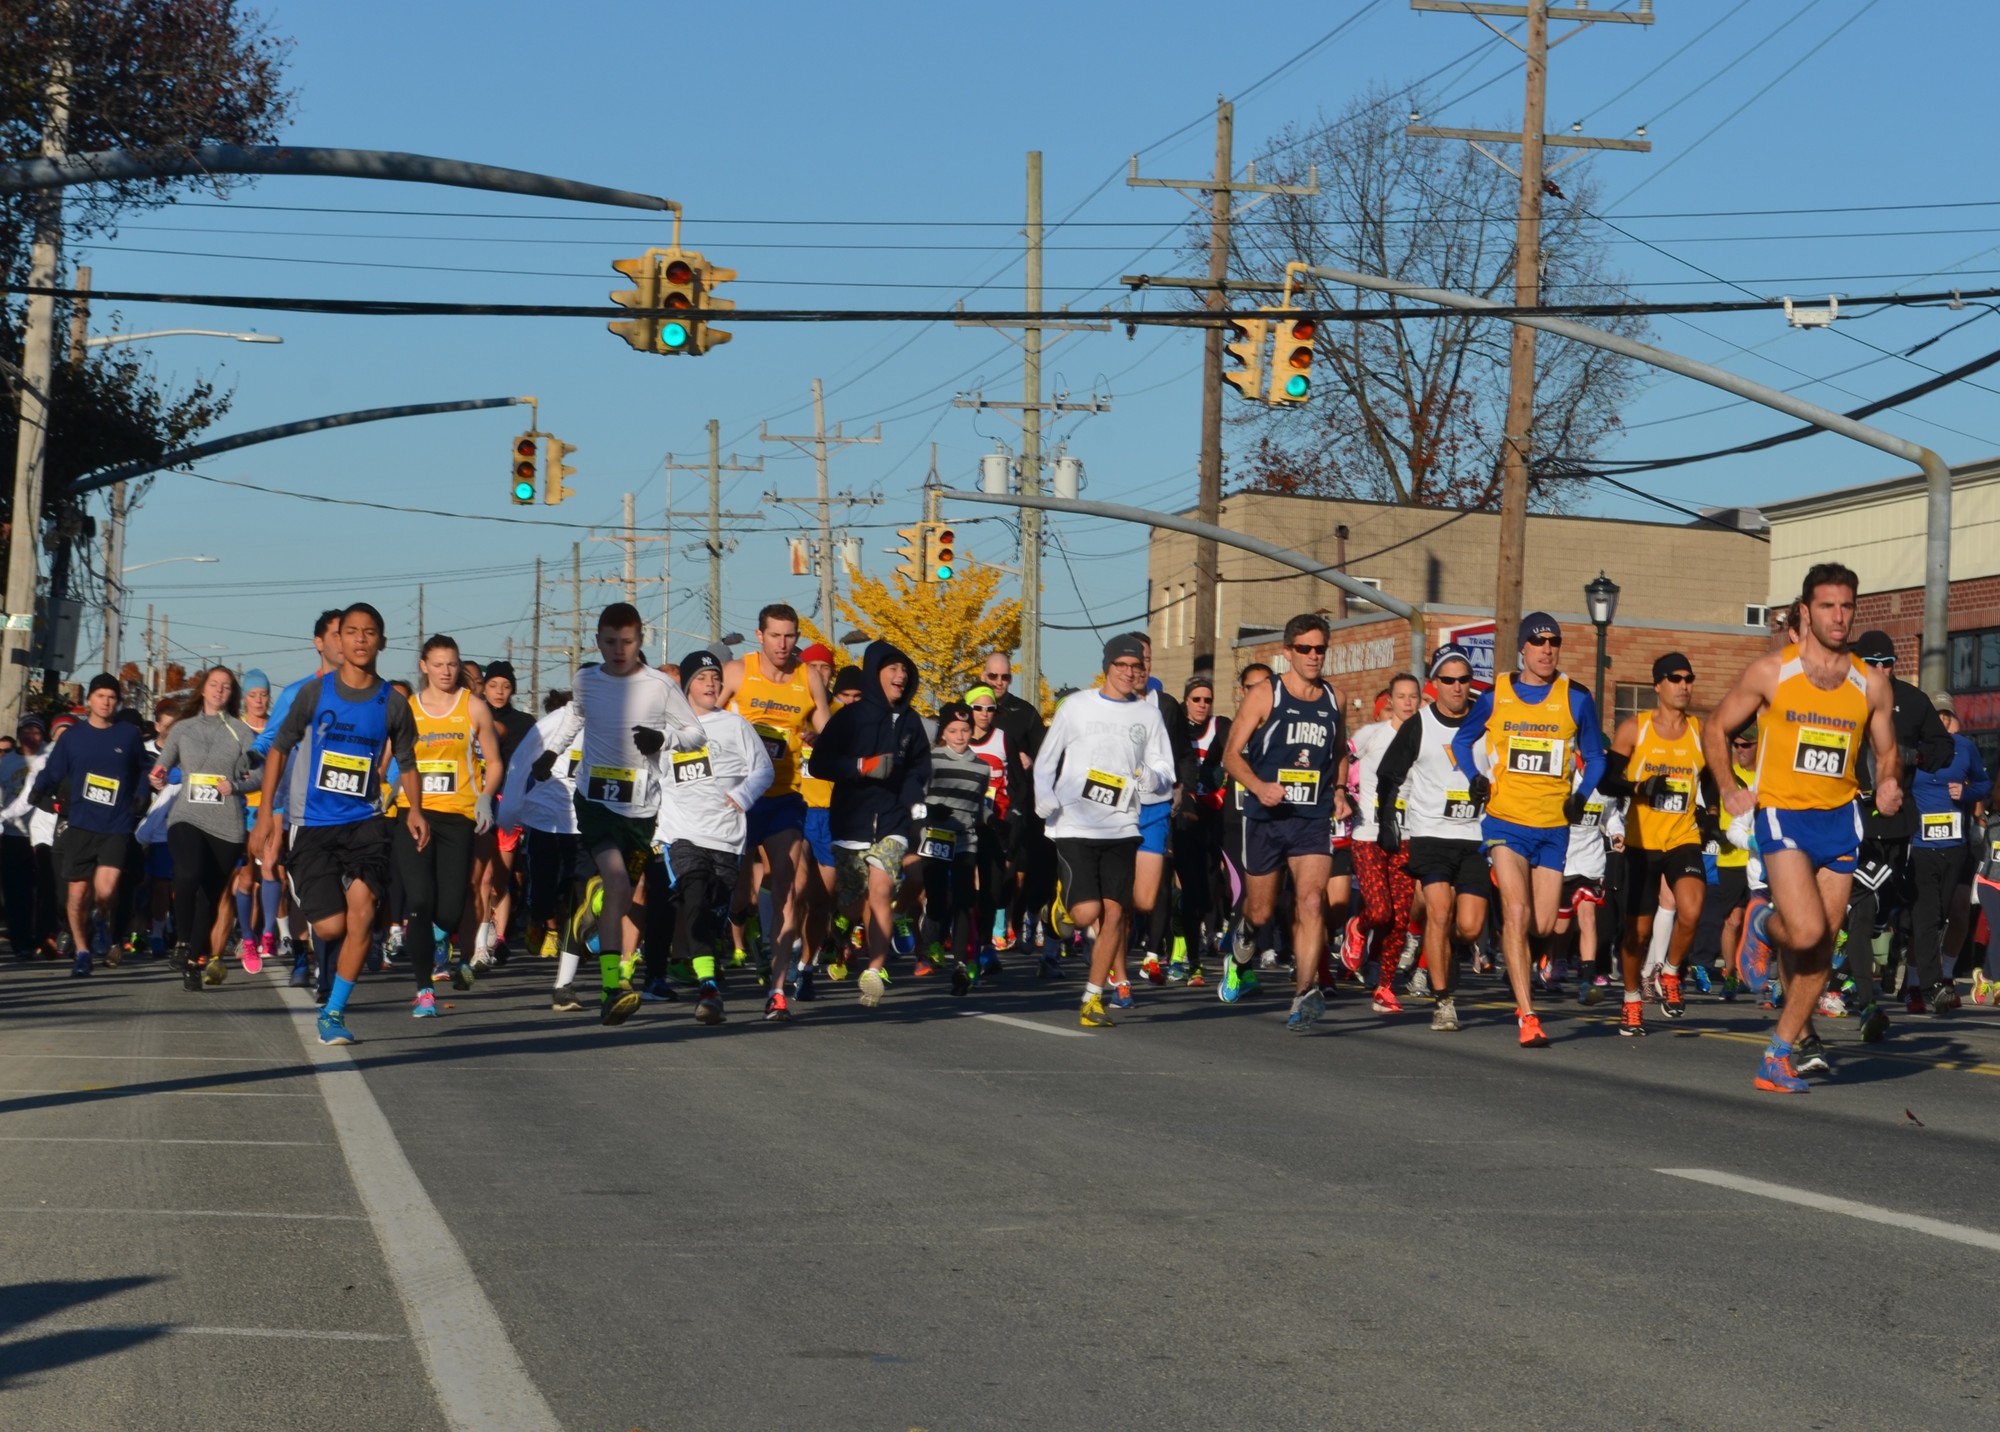 The beginning of the race in Lynbrook on Merrick Road.